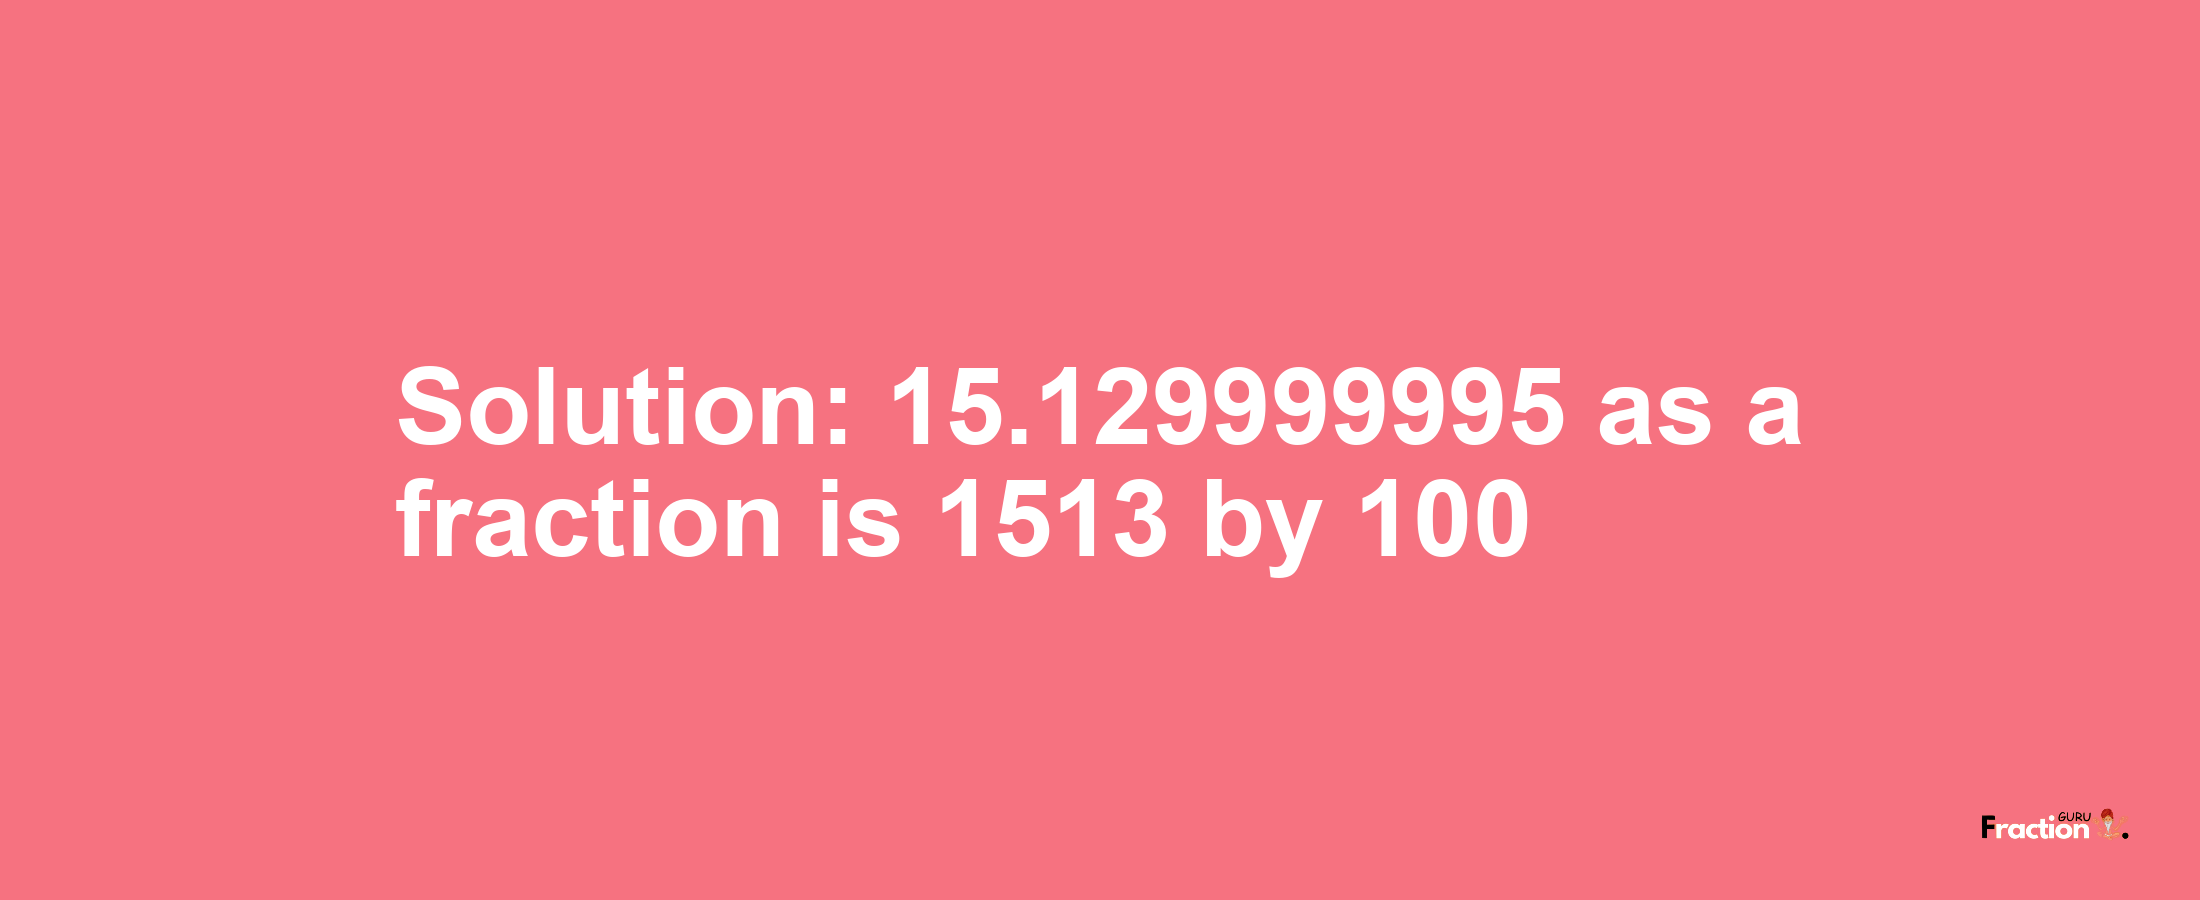 Solution:15.129999995 as a fraction is 1513/100